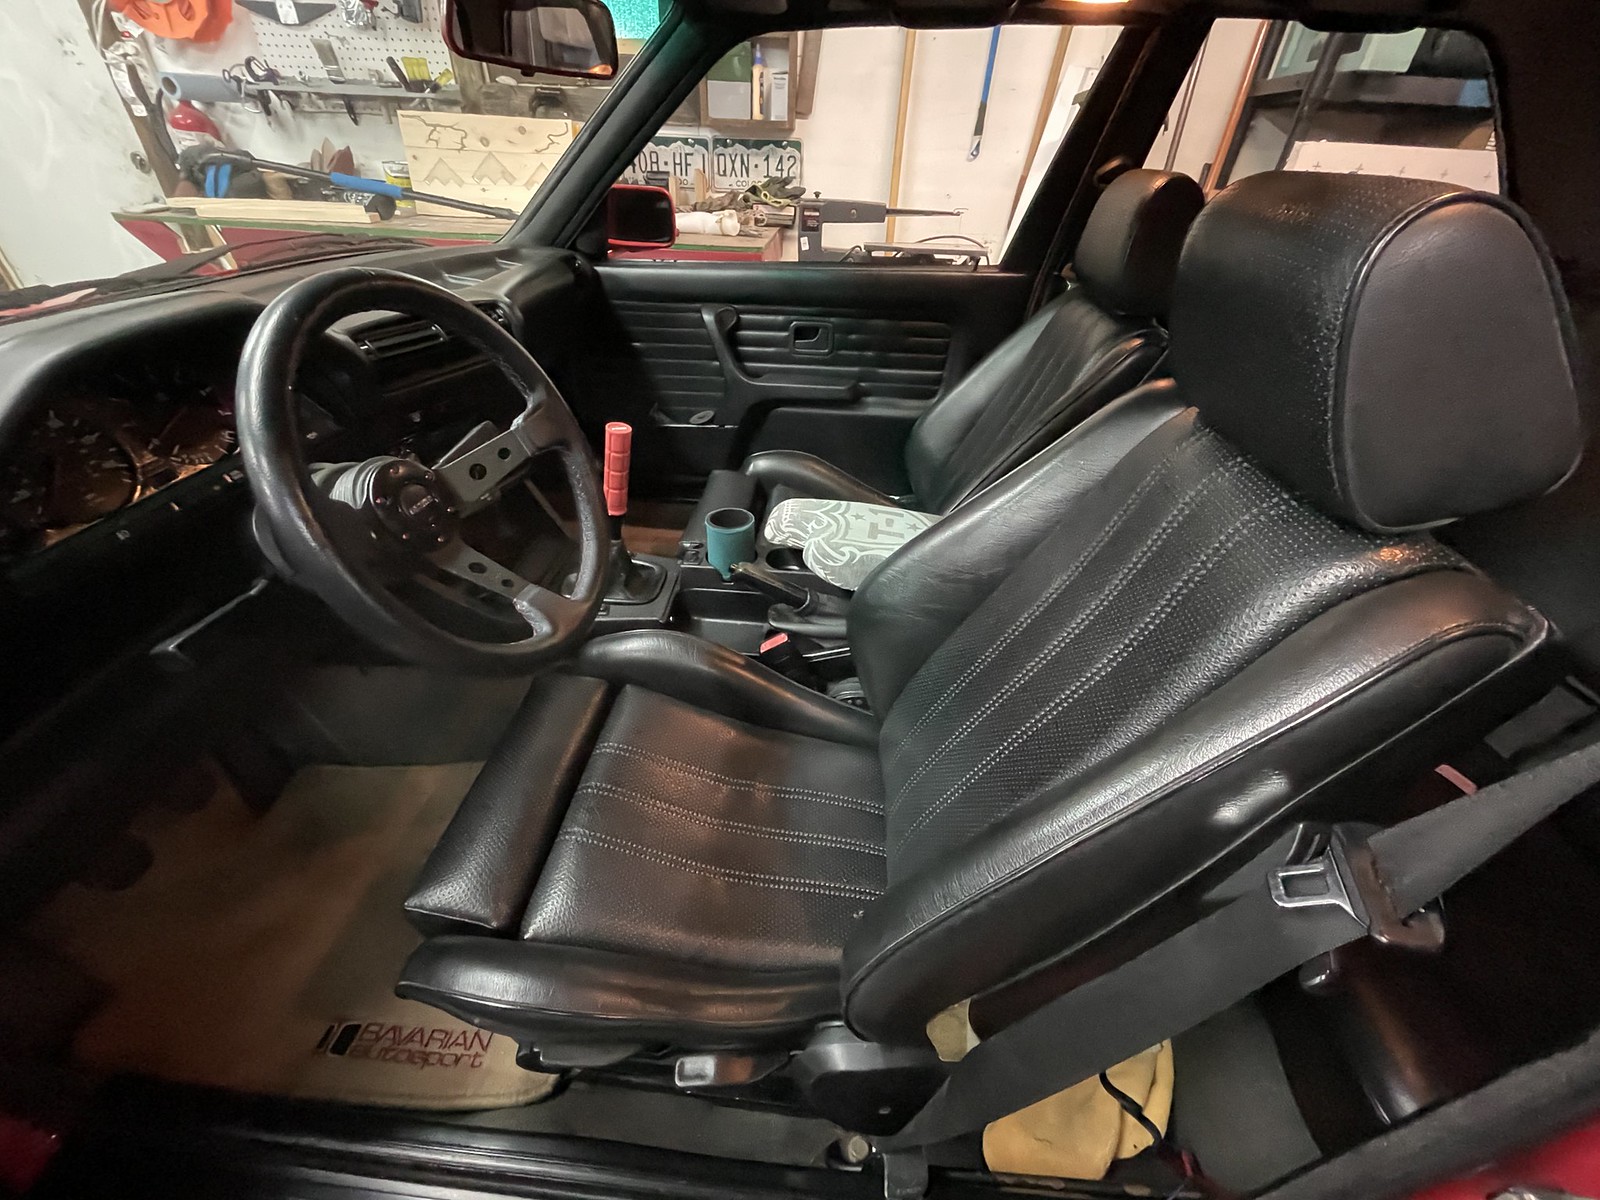 Vinyl Seat Repair..anyone got experience with this?